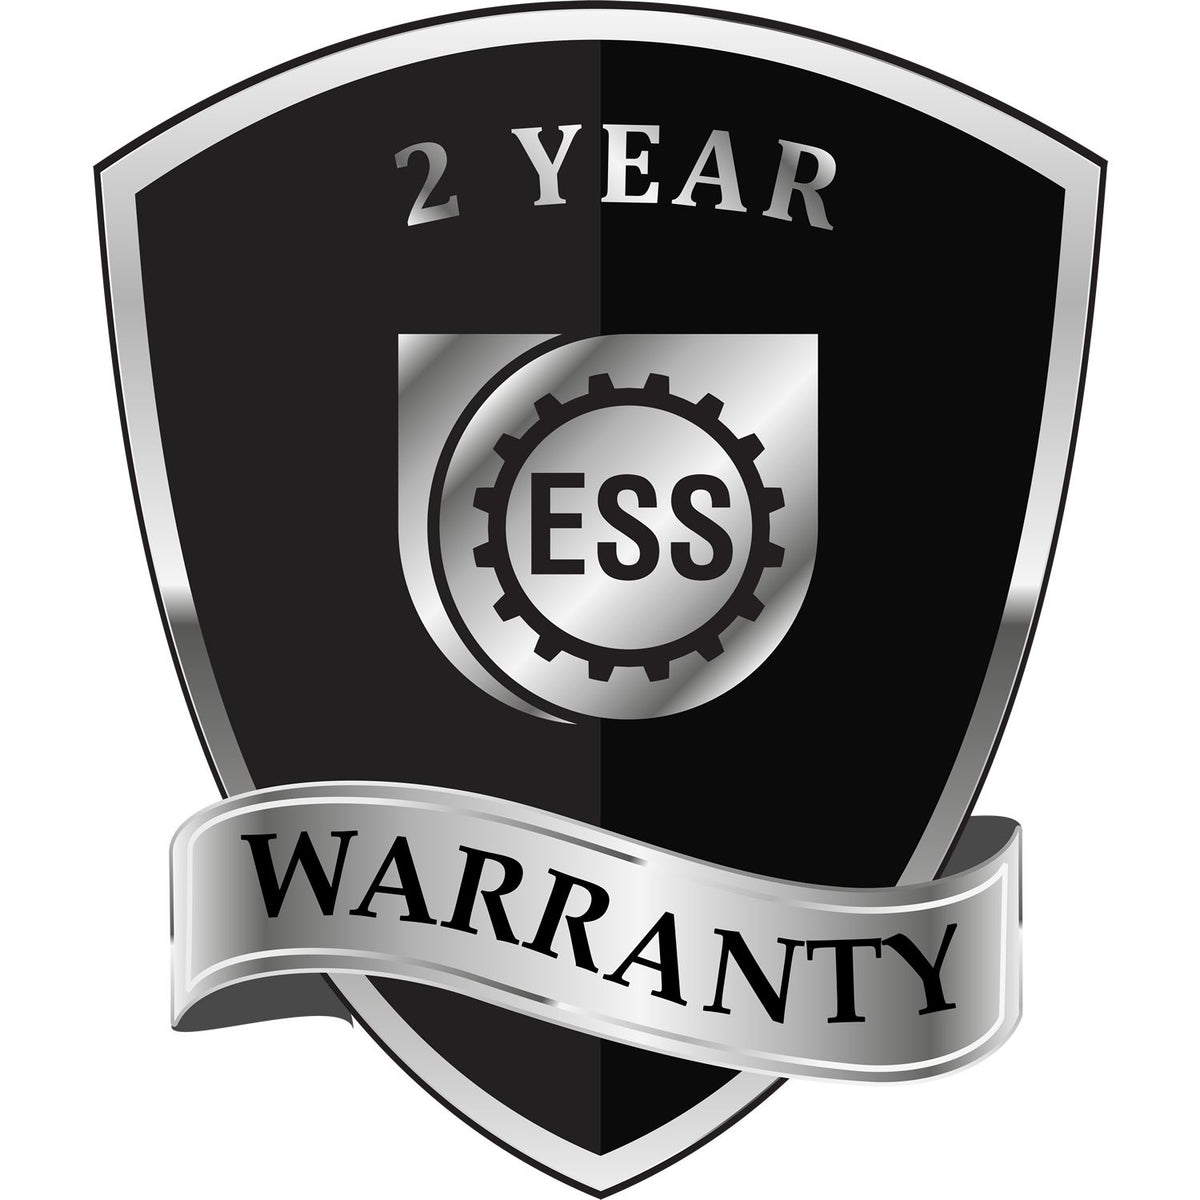 A black and silver badge or emblem showing warranty information for the Hybrid Hawaii Engineer Seal